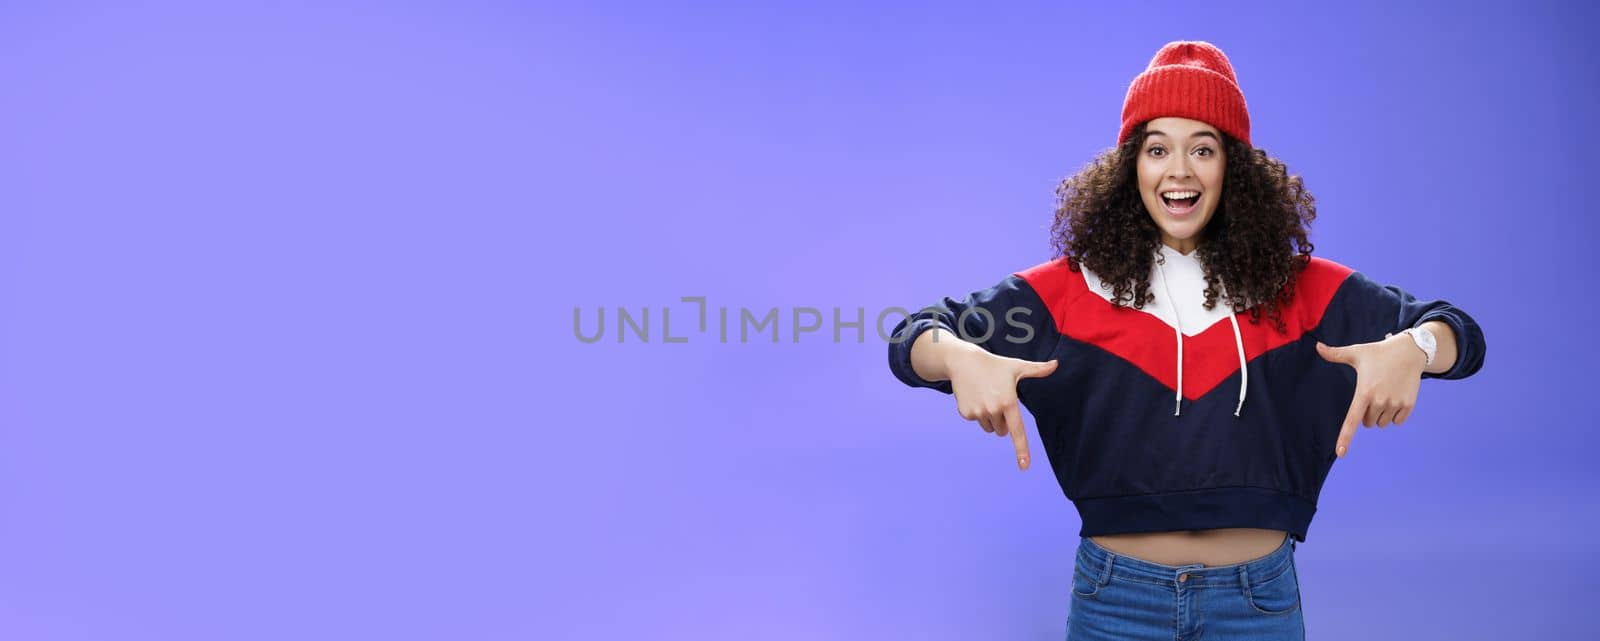 Hurry up and chek it out. Portrait of charismatic joyful and excited young cute curly-haired girl in beanie and stylish outfit pointing down, smiling broadly inviting join fun over blue background.